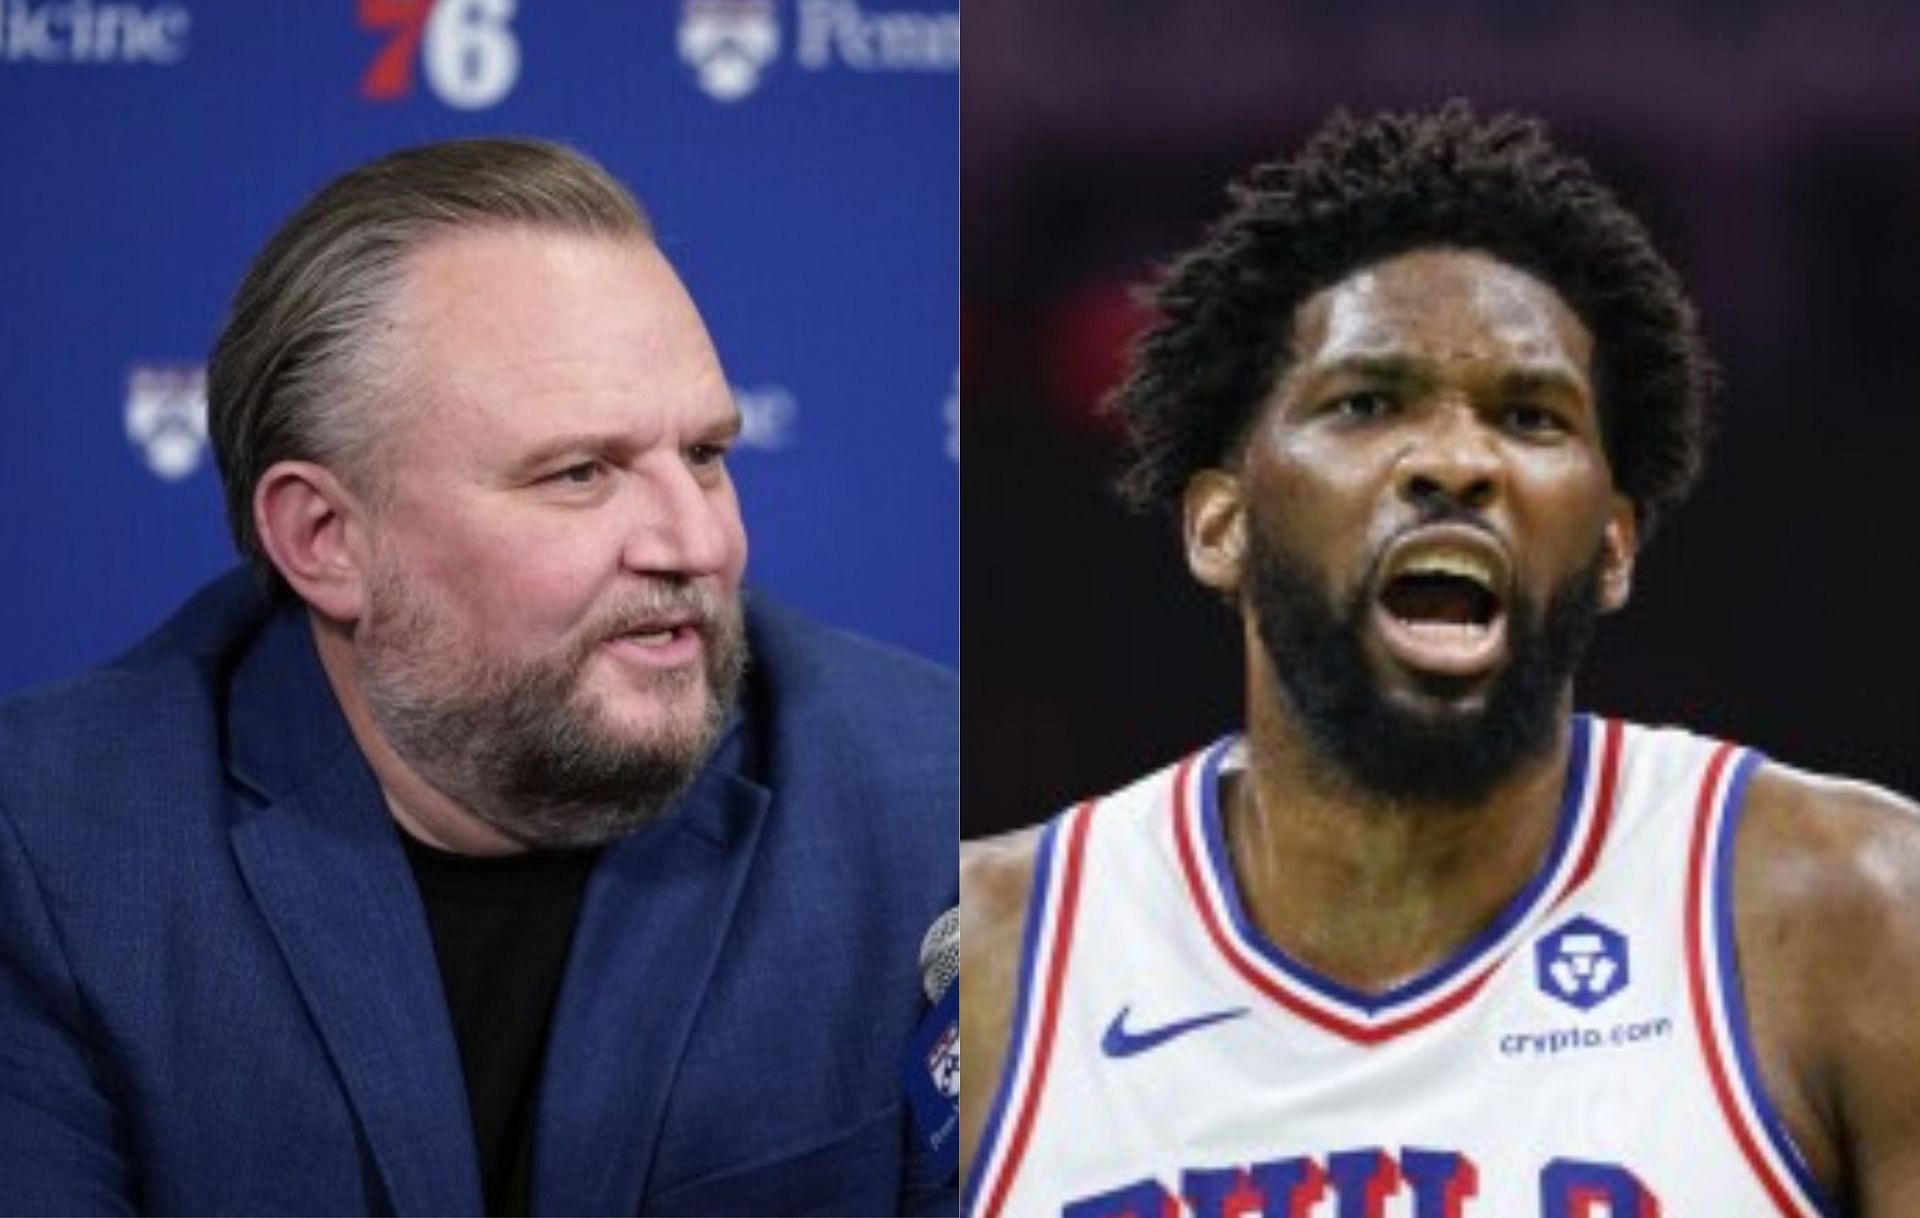 Daryl Morey agreed with a social media post on Joel Embiid